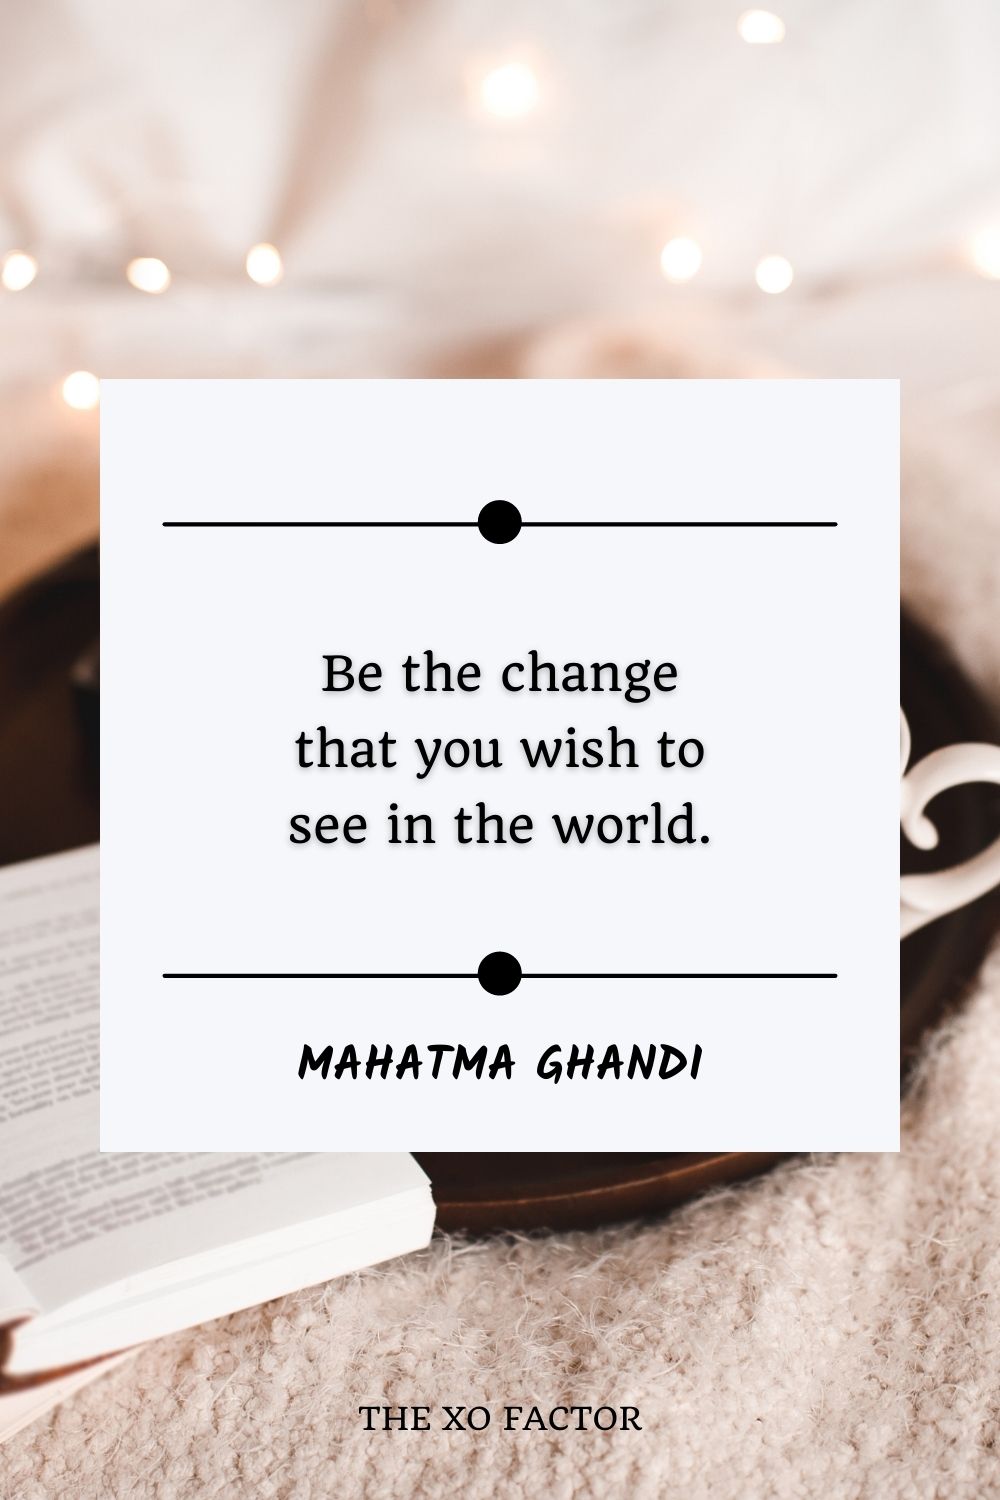 Be the change that you wish to see in the world.”- Mahatma Ghandi